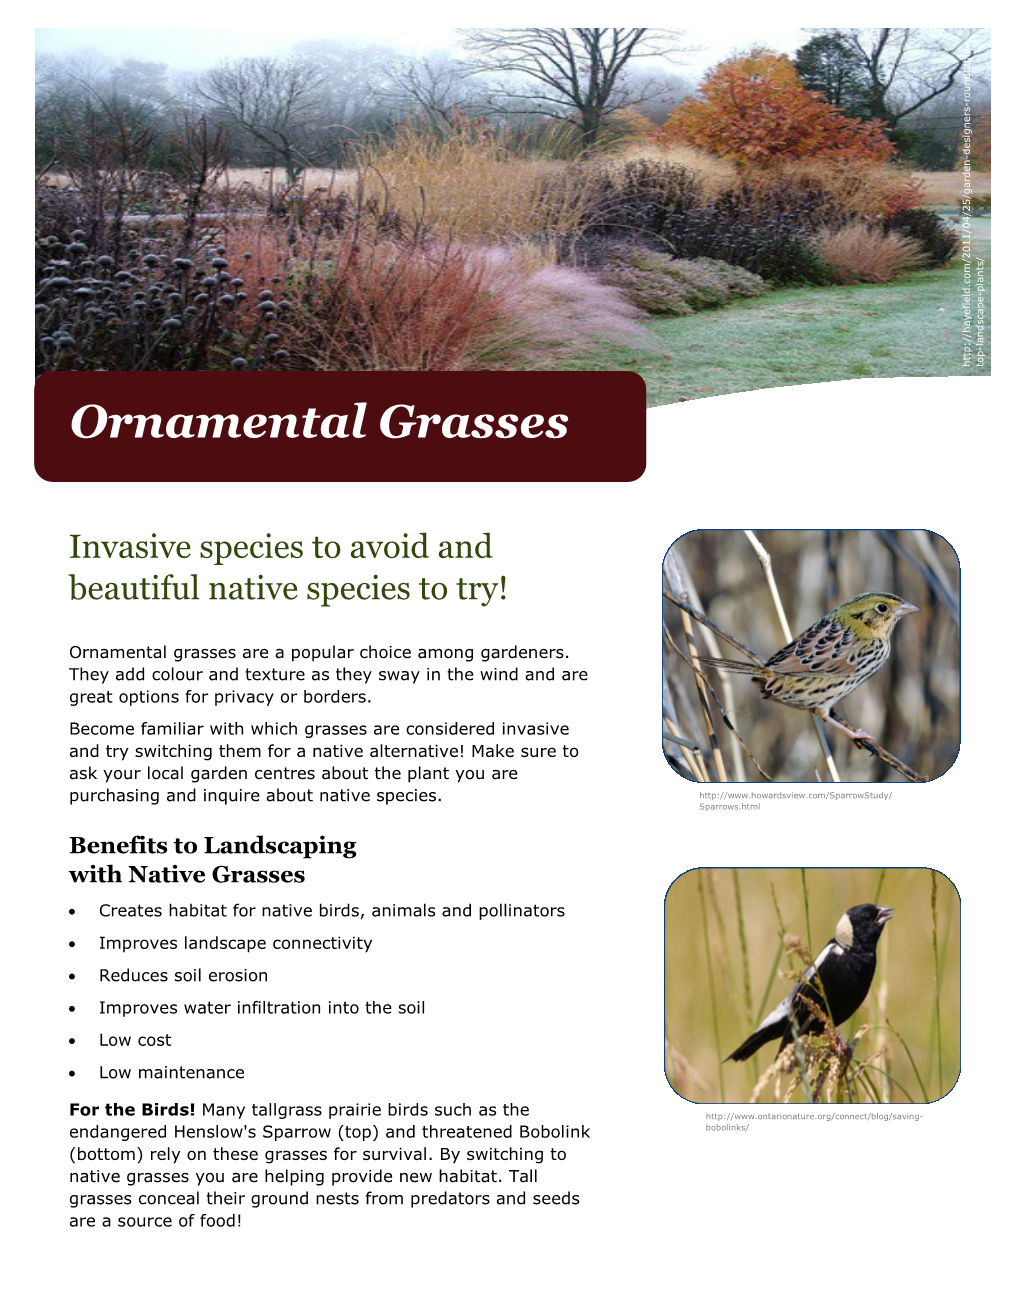 Ornamental Grasses How Can You Help Reduce the Spread of Invasive Species? Invasive Species to Avoid and  Learn to Identify Invasive Species